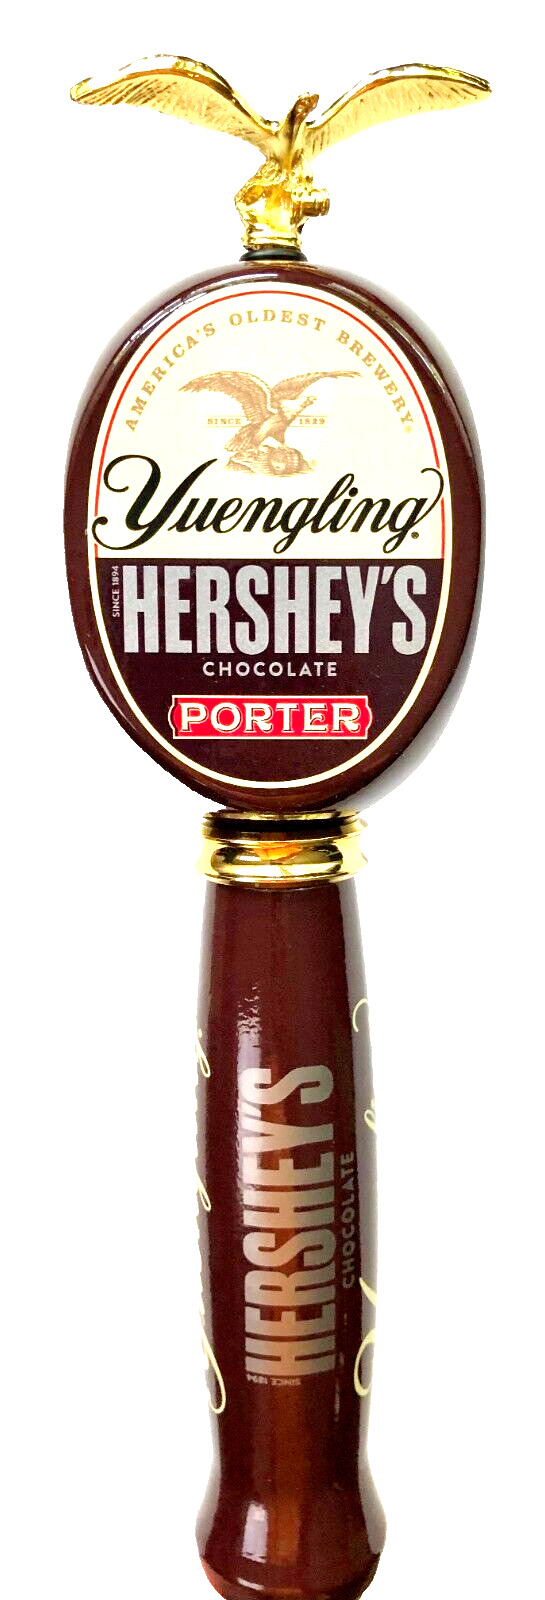 *NEW* YUENGLING - HERSHEY CHOCOLATE PORTER - 3D - BEER TAP HANDLE (Eagle Topper)